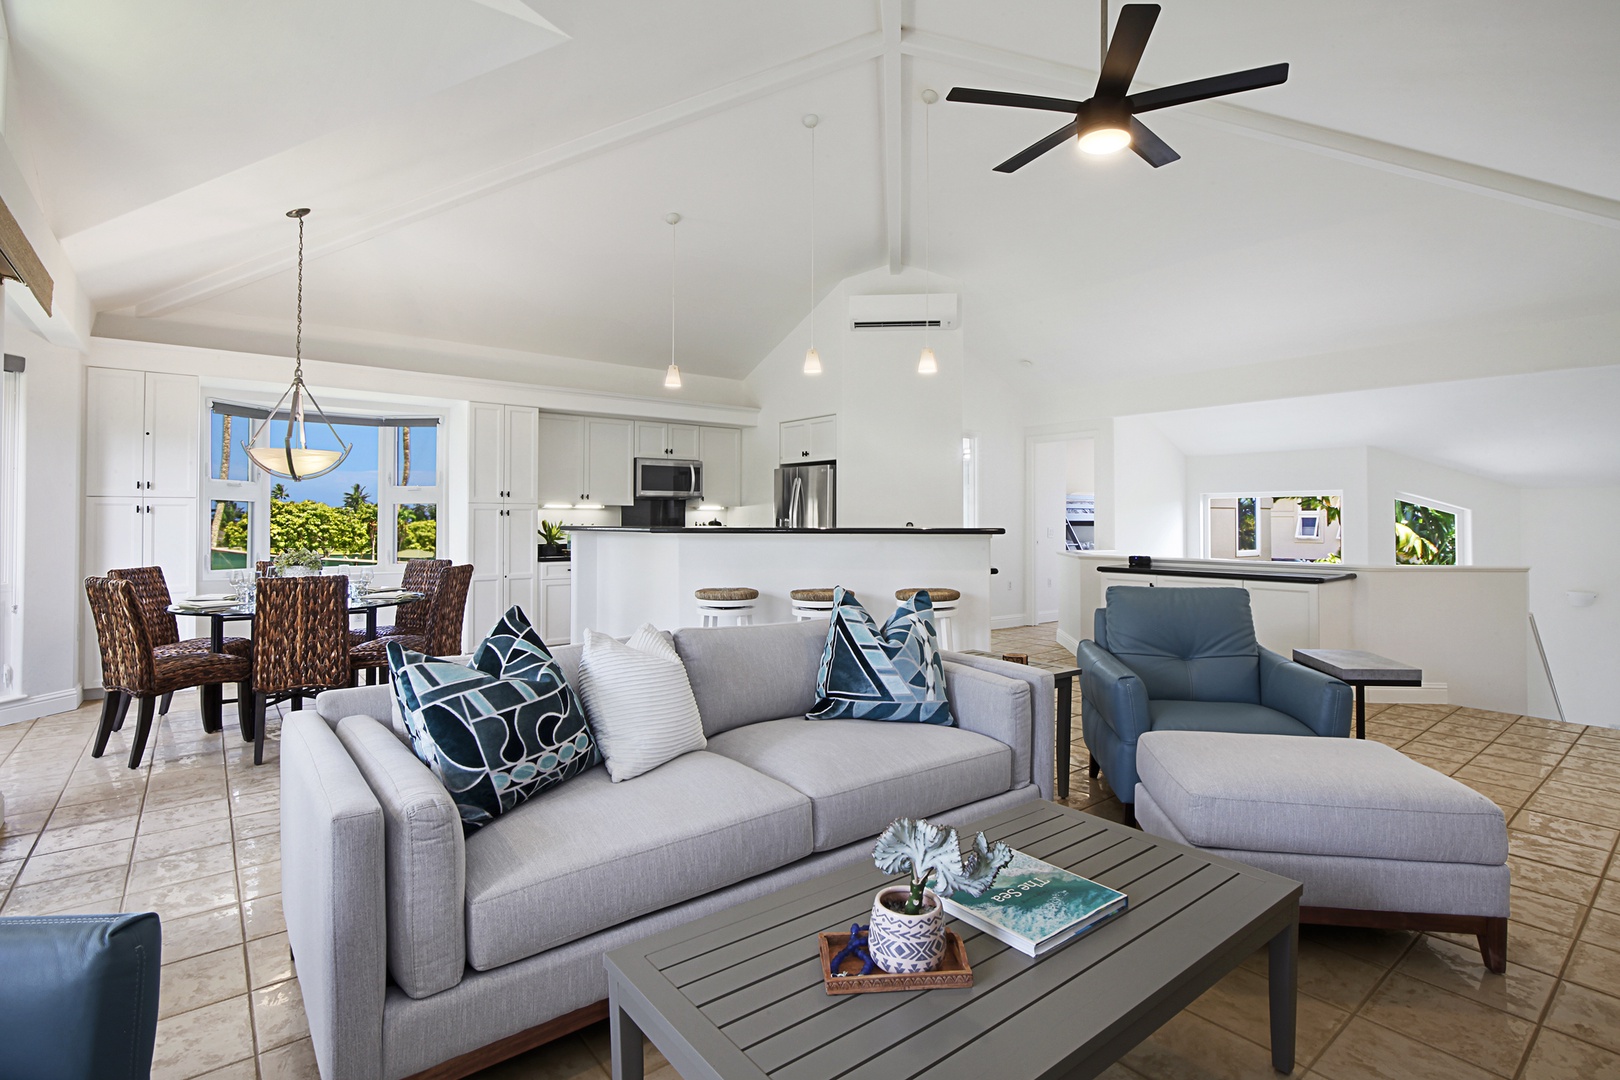 Princeville Vacation Rentals, Villas on the Prince #28 - Grab a seat in the living room and plan out your island adventures for the day